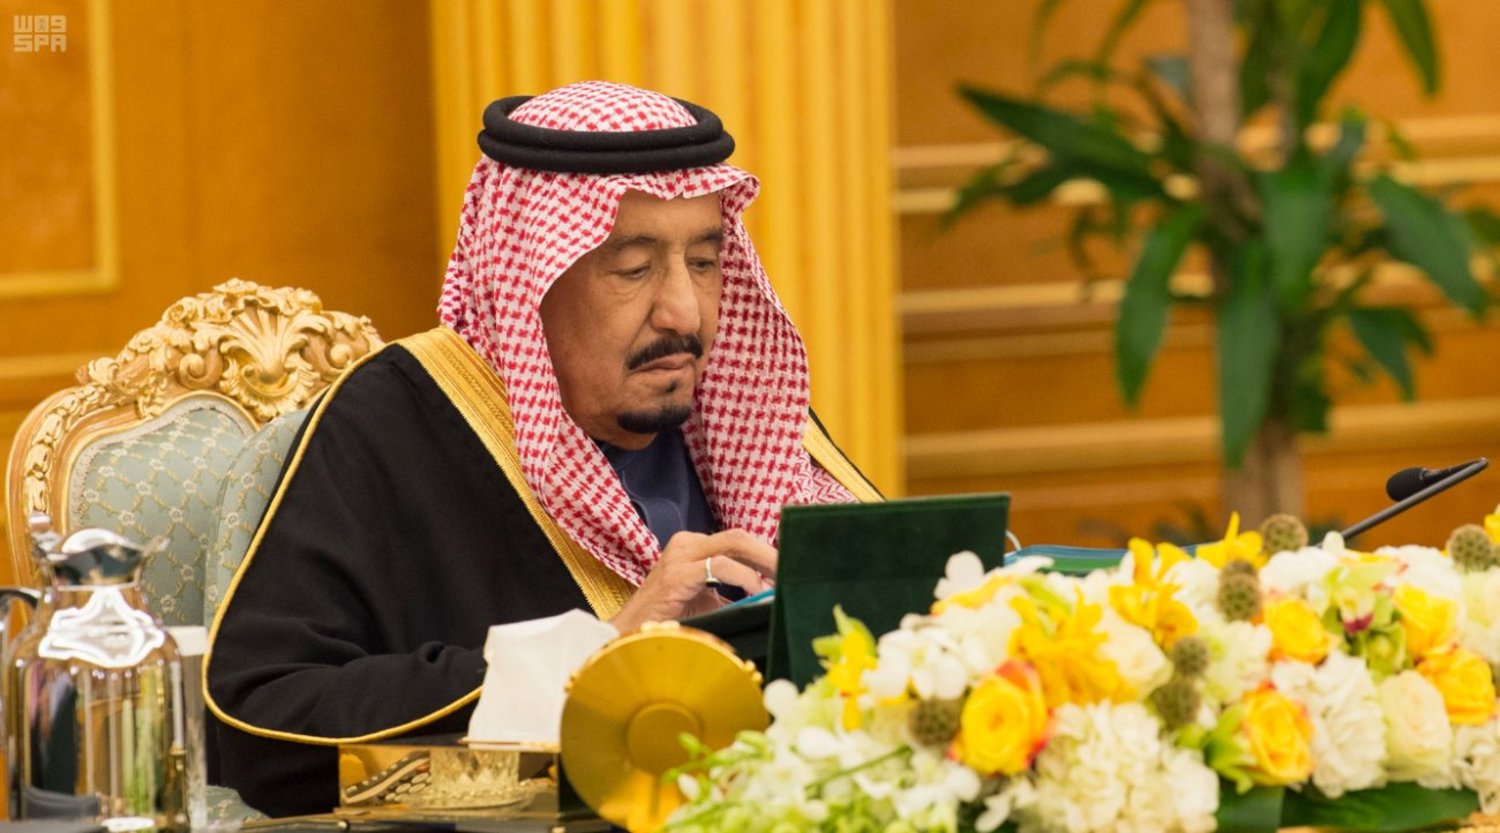 Custodian of the Two Holy Mosques King Salman bin Abdulaziz chairing a cabinet session at the Yammama palace in Riyadh. (SPA)